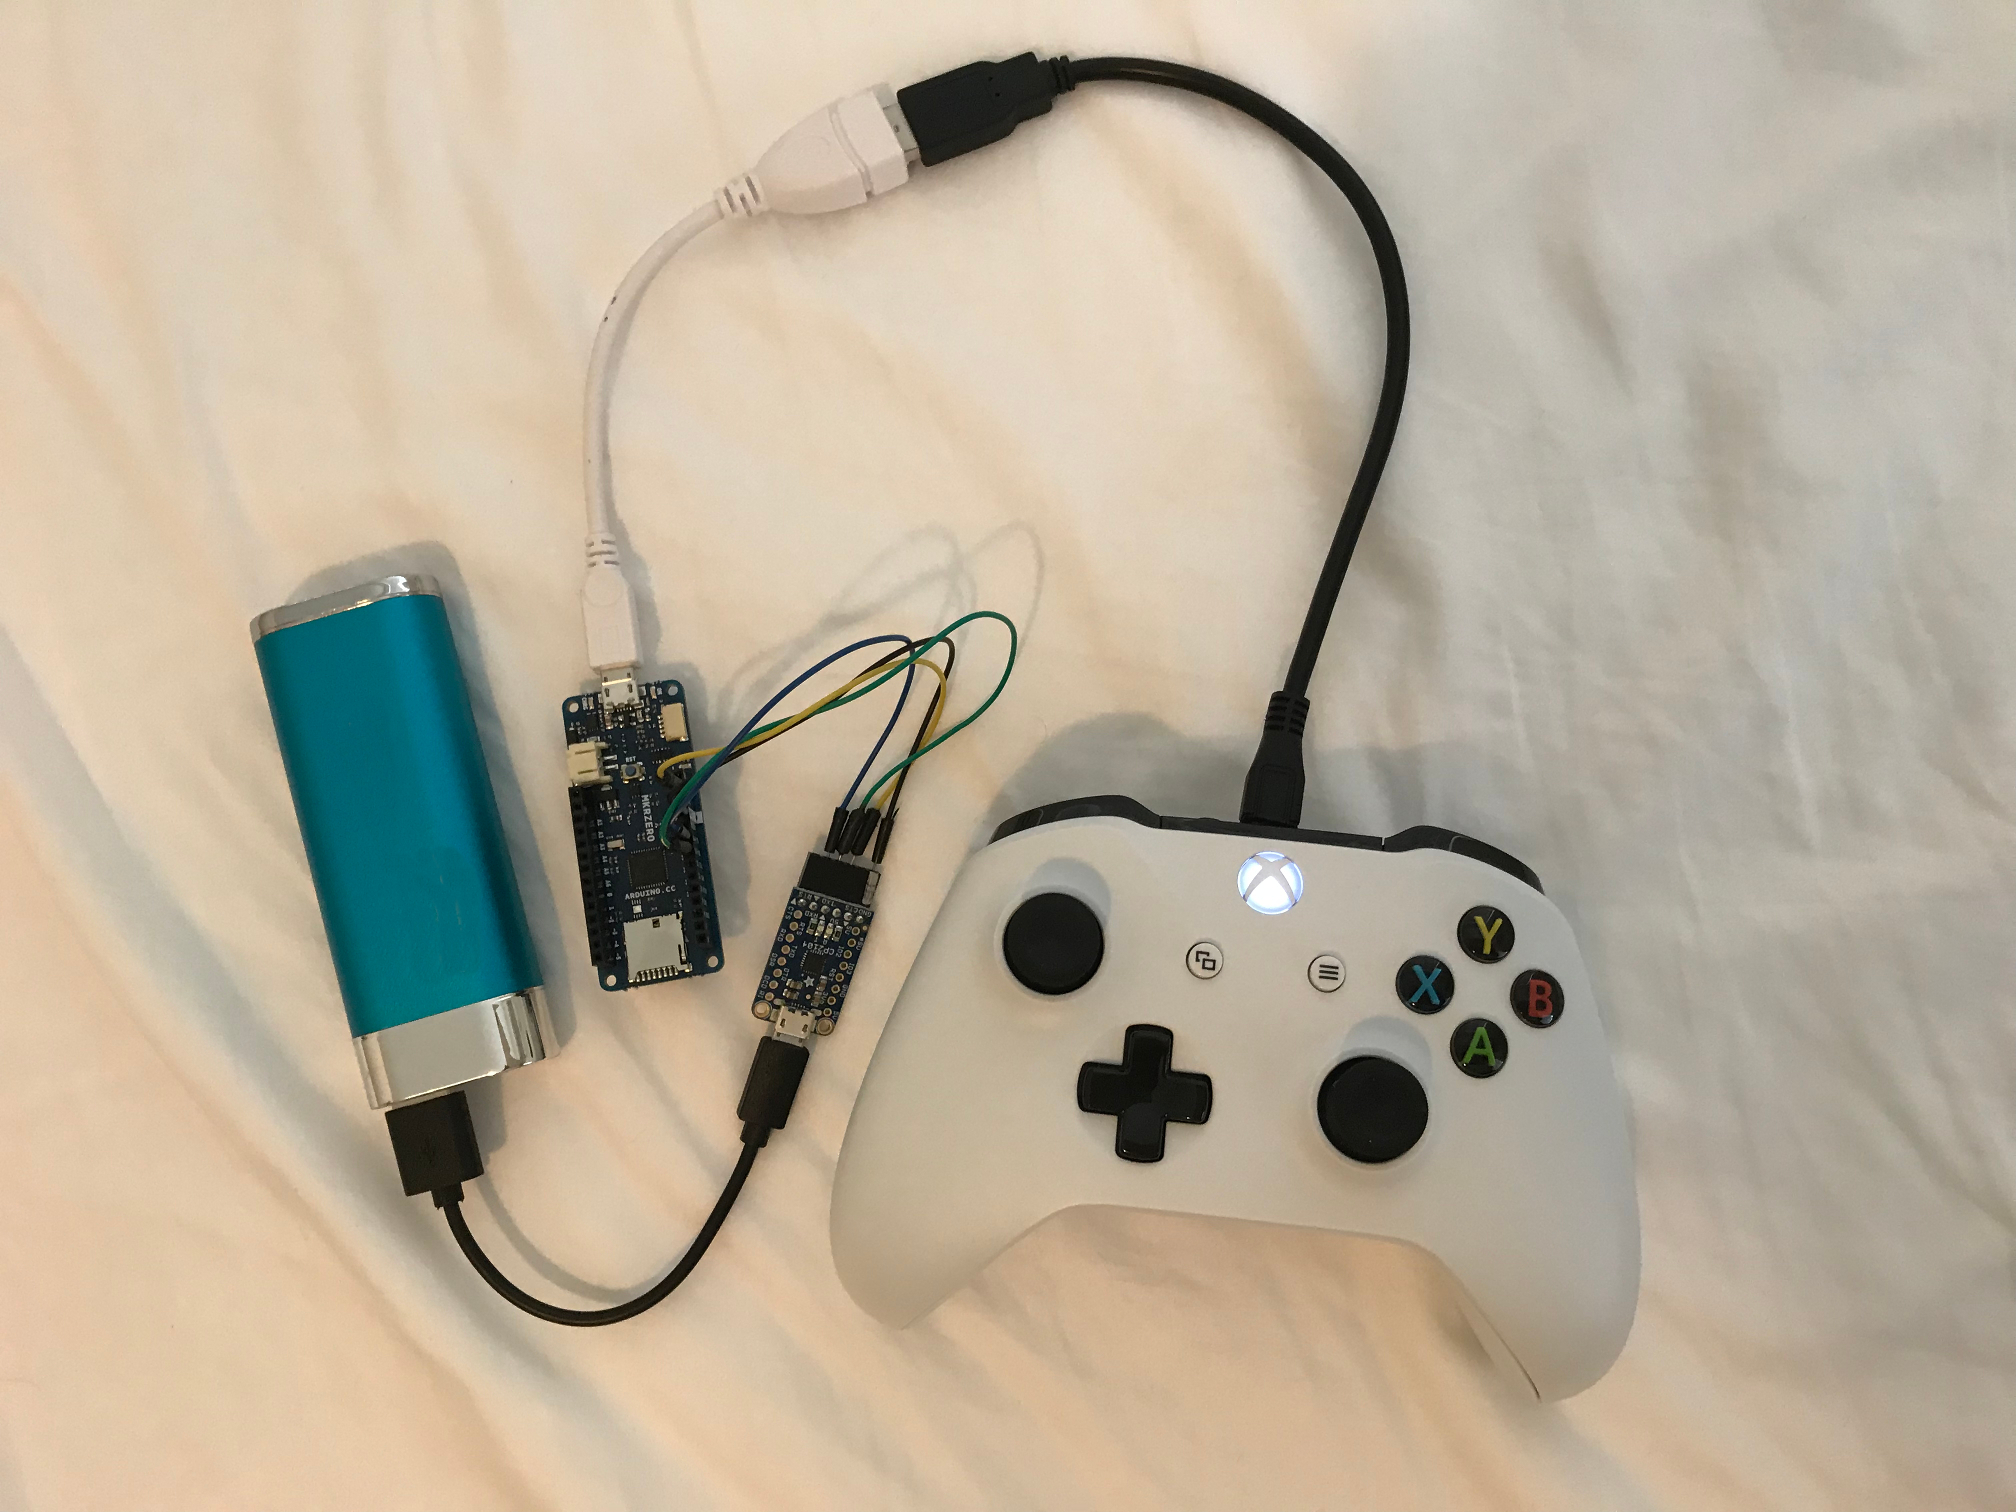 Image of MKR Zero connected to Xbox One controller